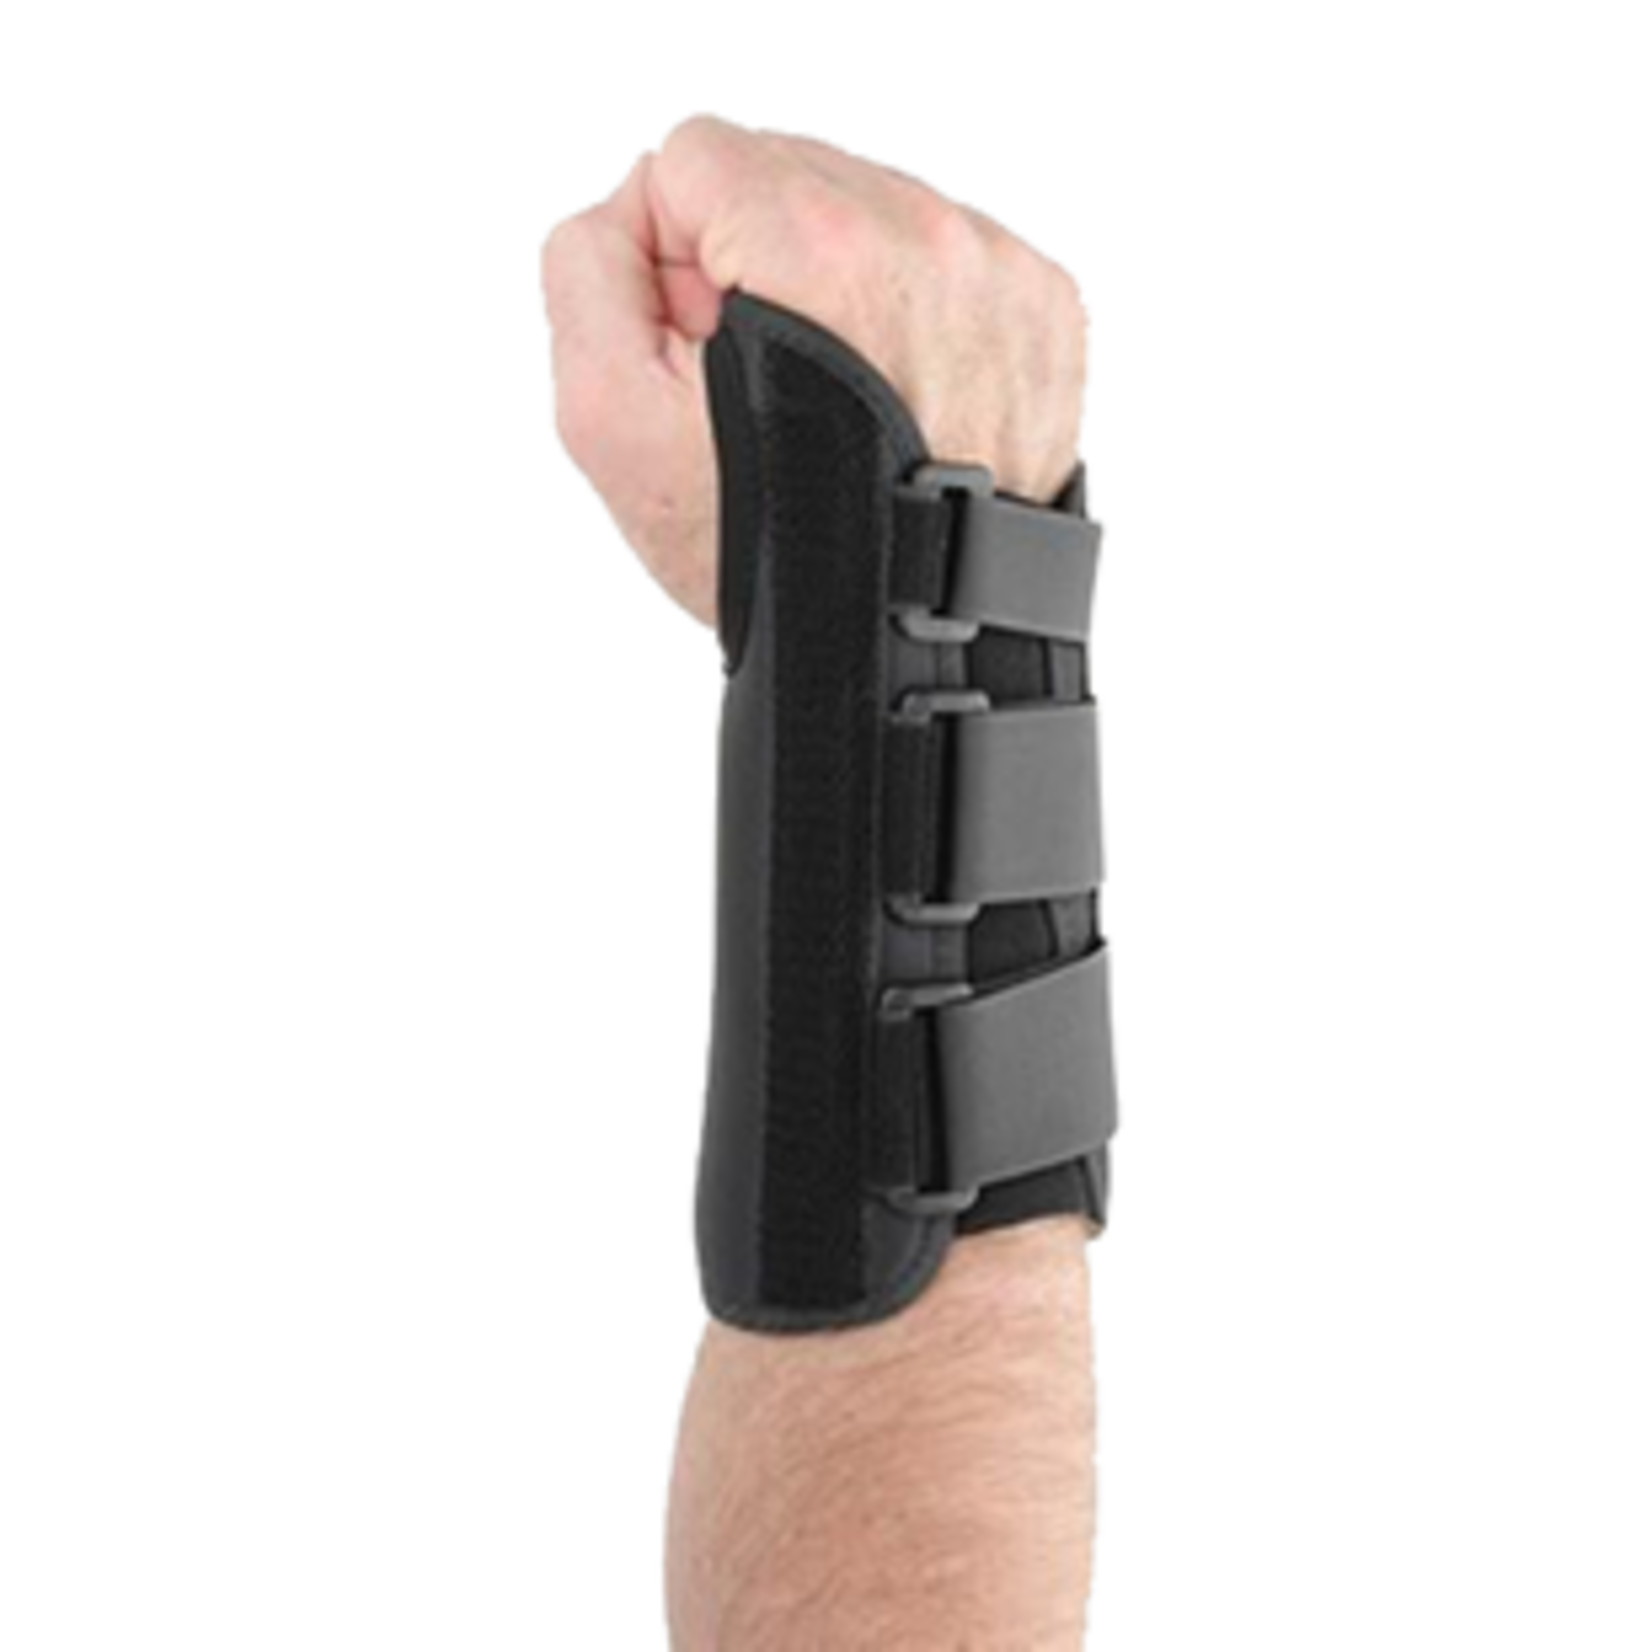 Universal Wrist Brace with Thumb Spica SUGGESTED HCPC: L3807 and